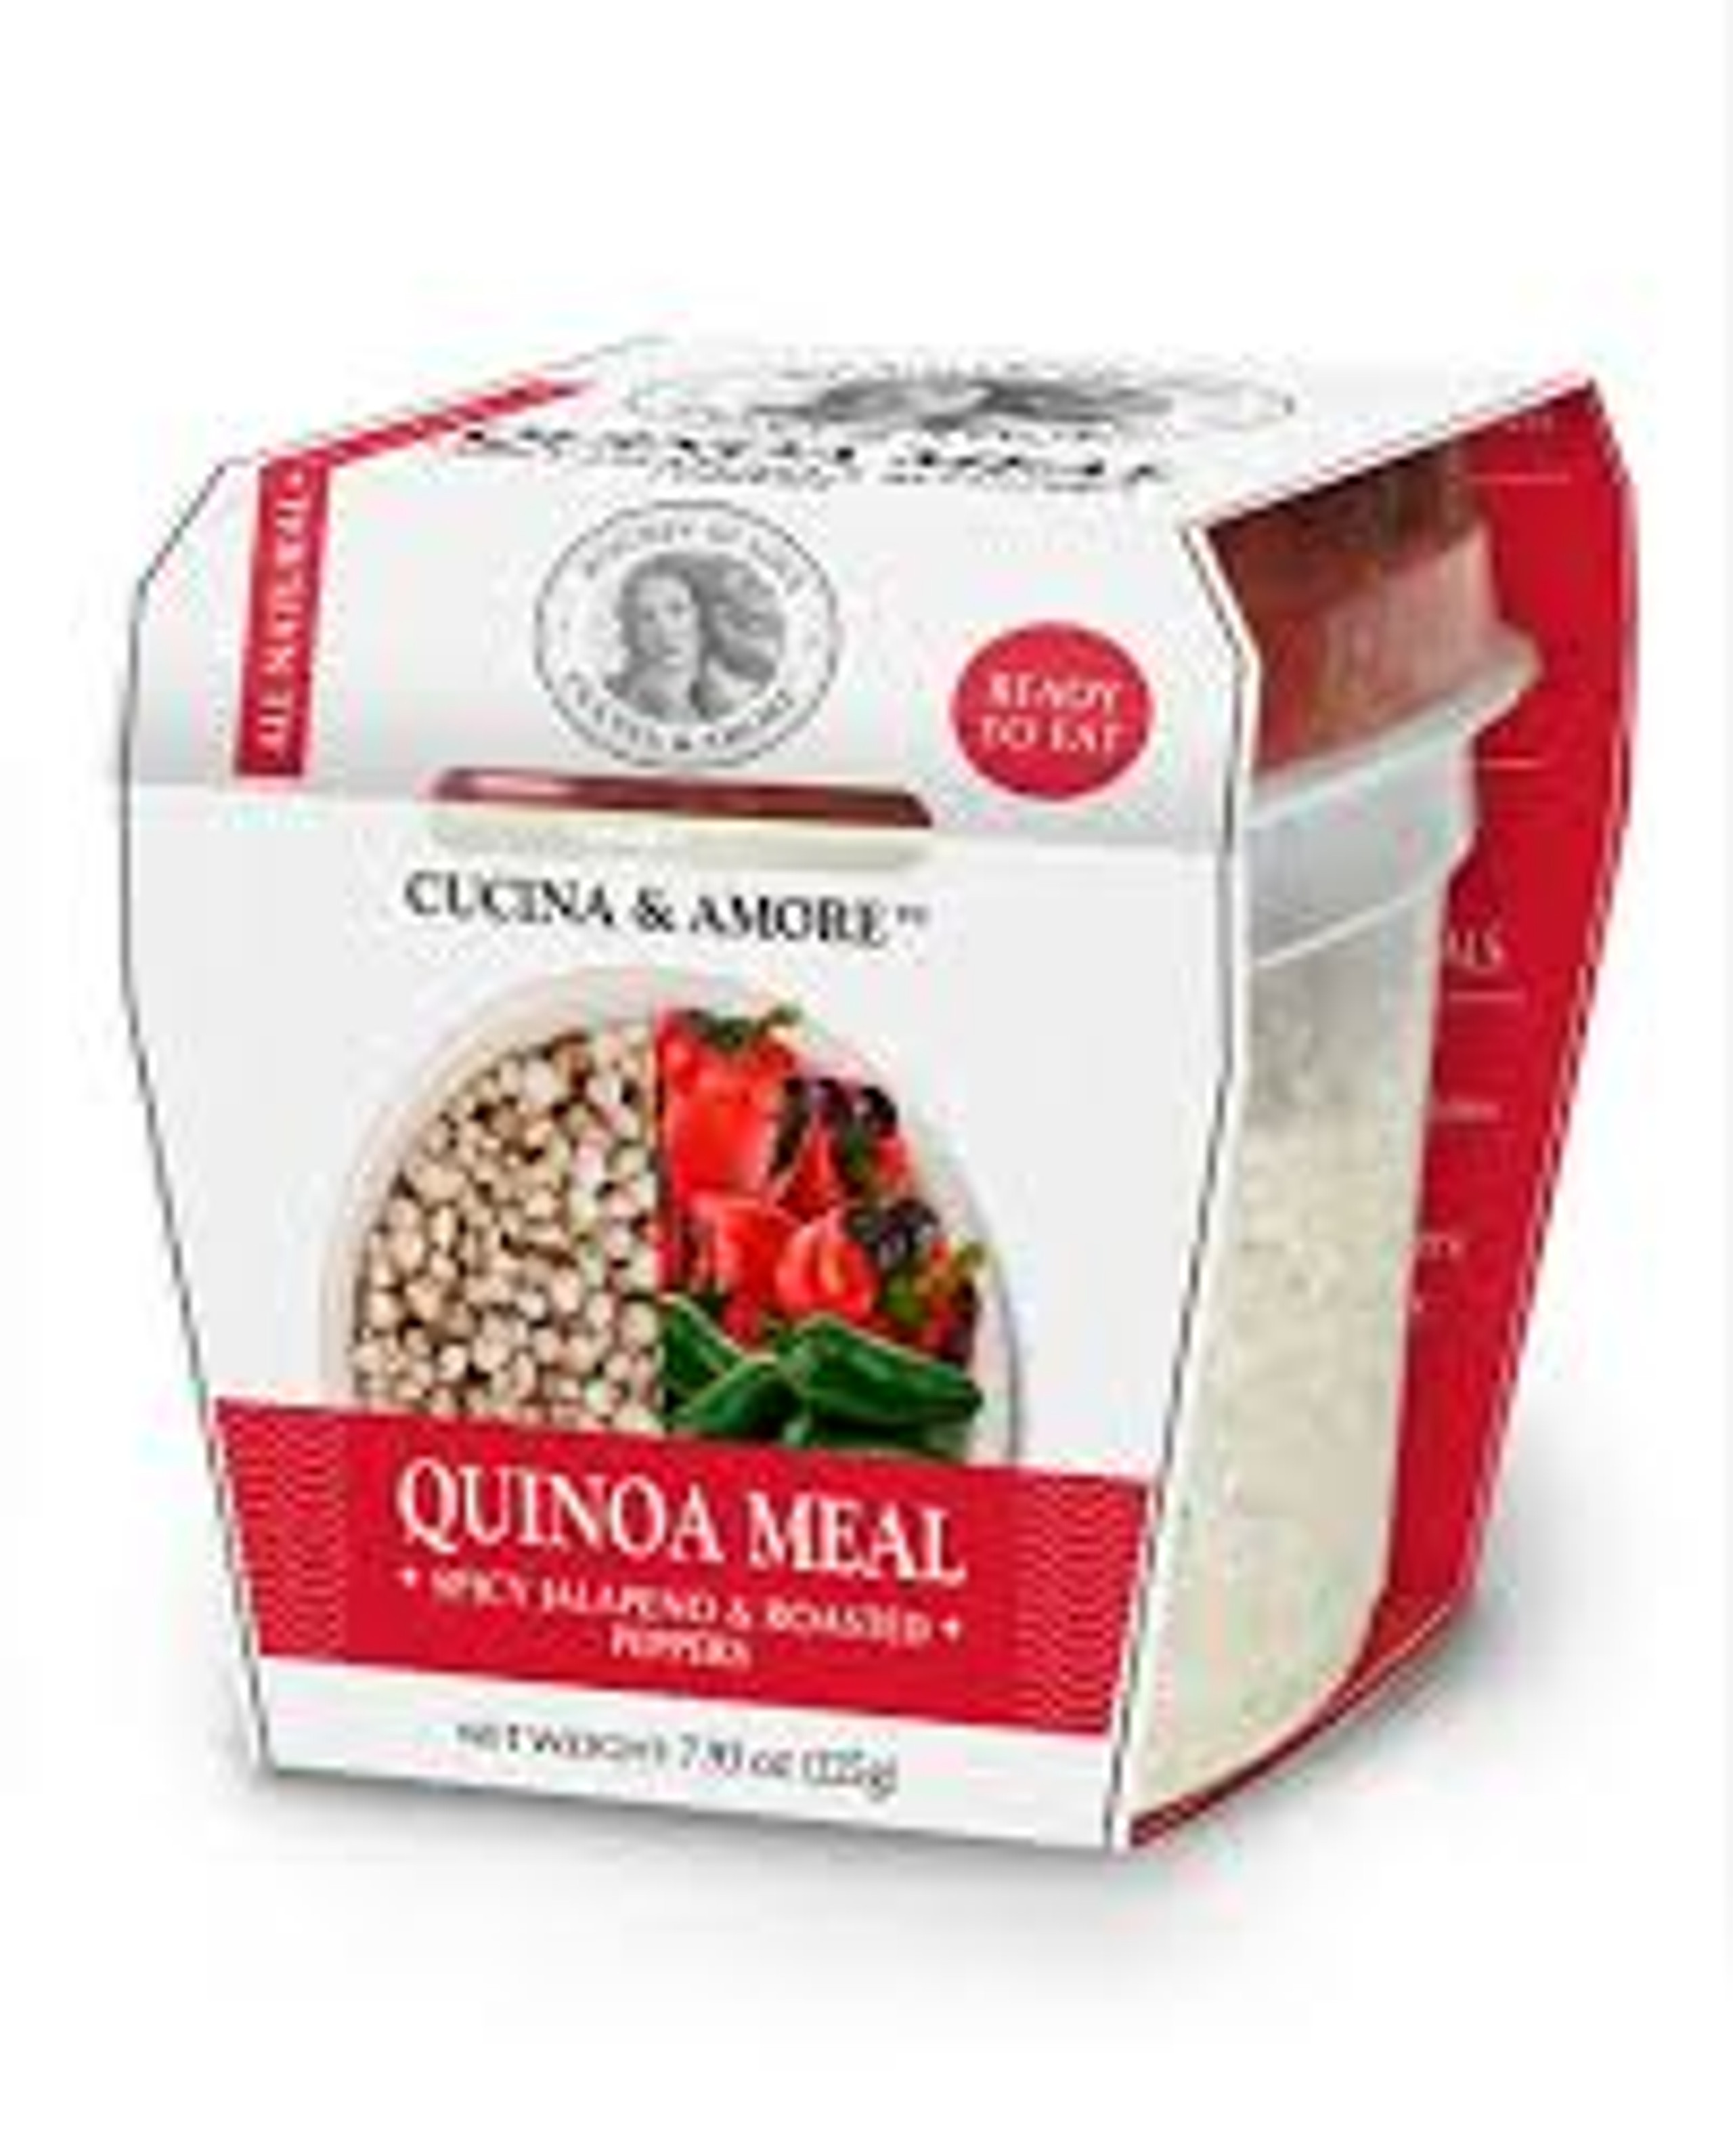 6 Pack Cucina And Amore Spicy Jalapeno And Roasted Peppers Quinoa Meal 79 Oz